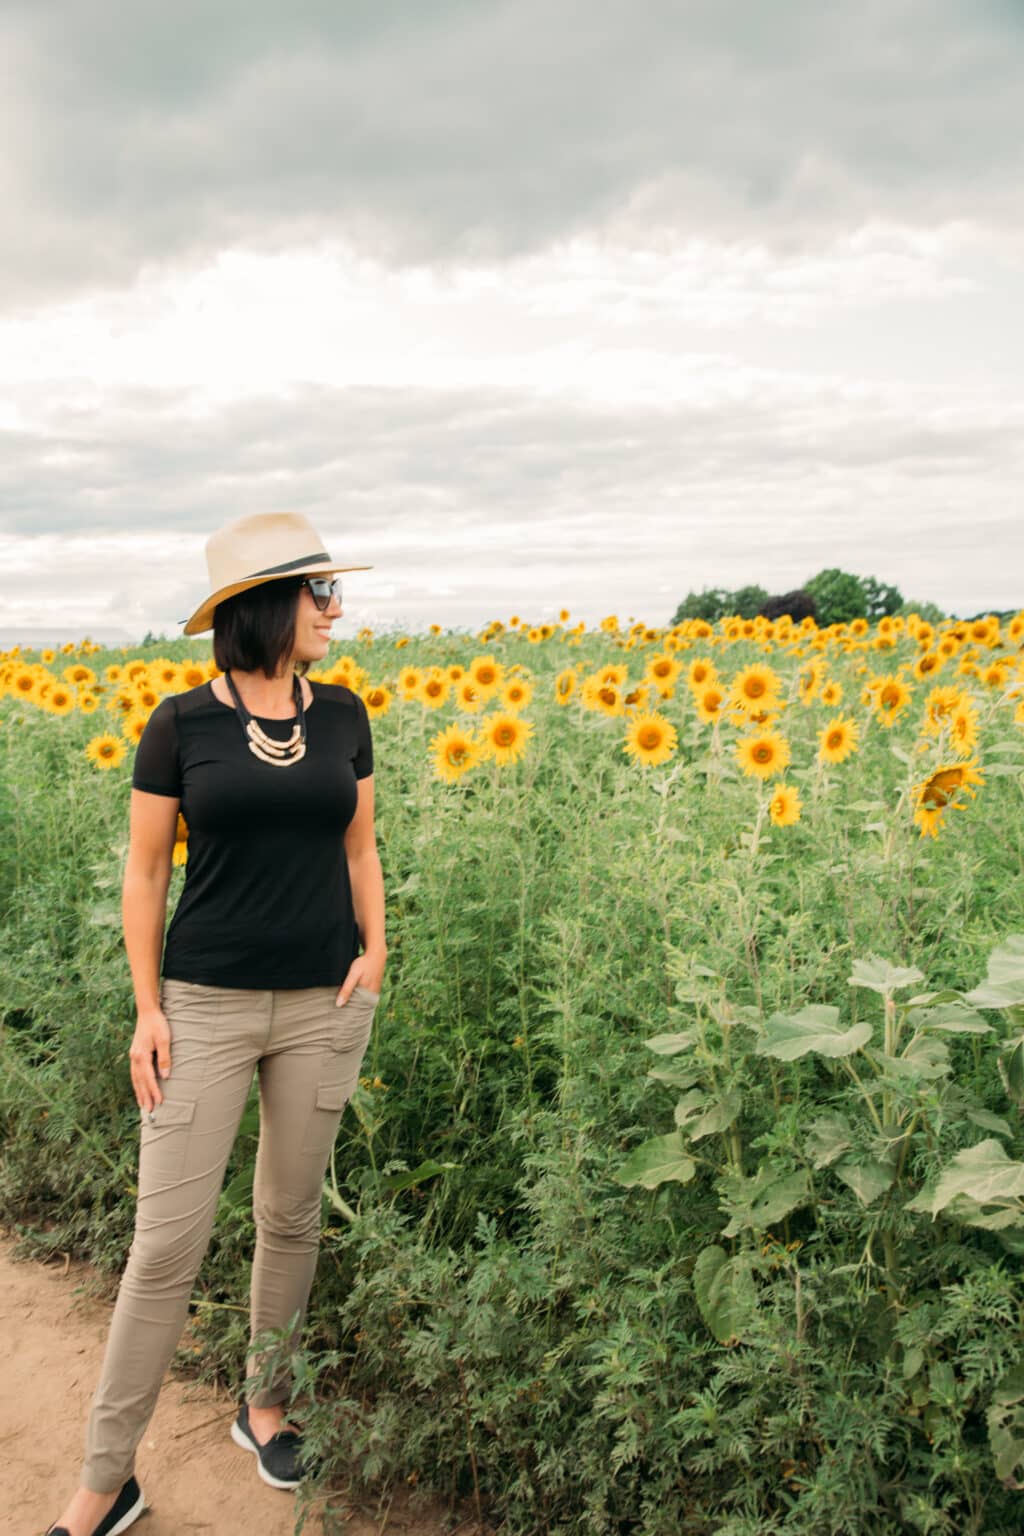 Wearing a black Anatomie t shirt with mesh sleeves and khaki skinny pants looking out at a field of sunflowers